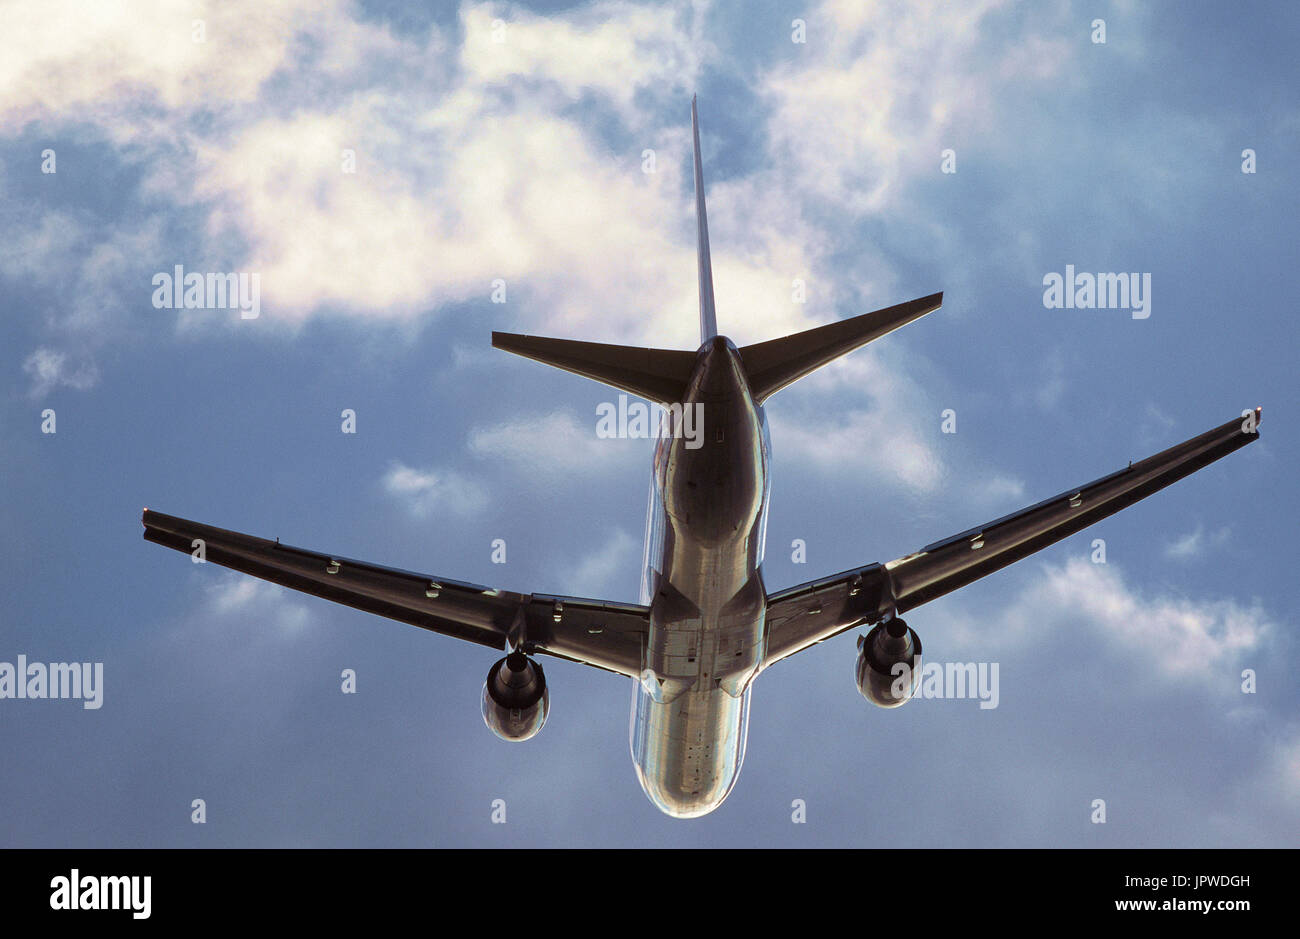 Boeing 767-300 flying enroute Stock Photo